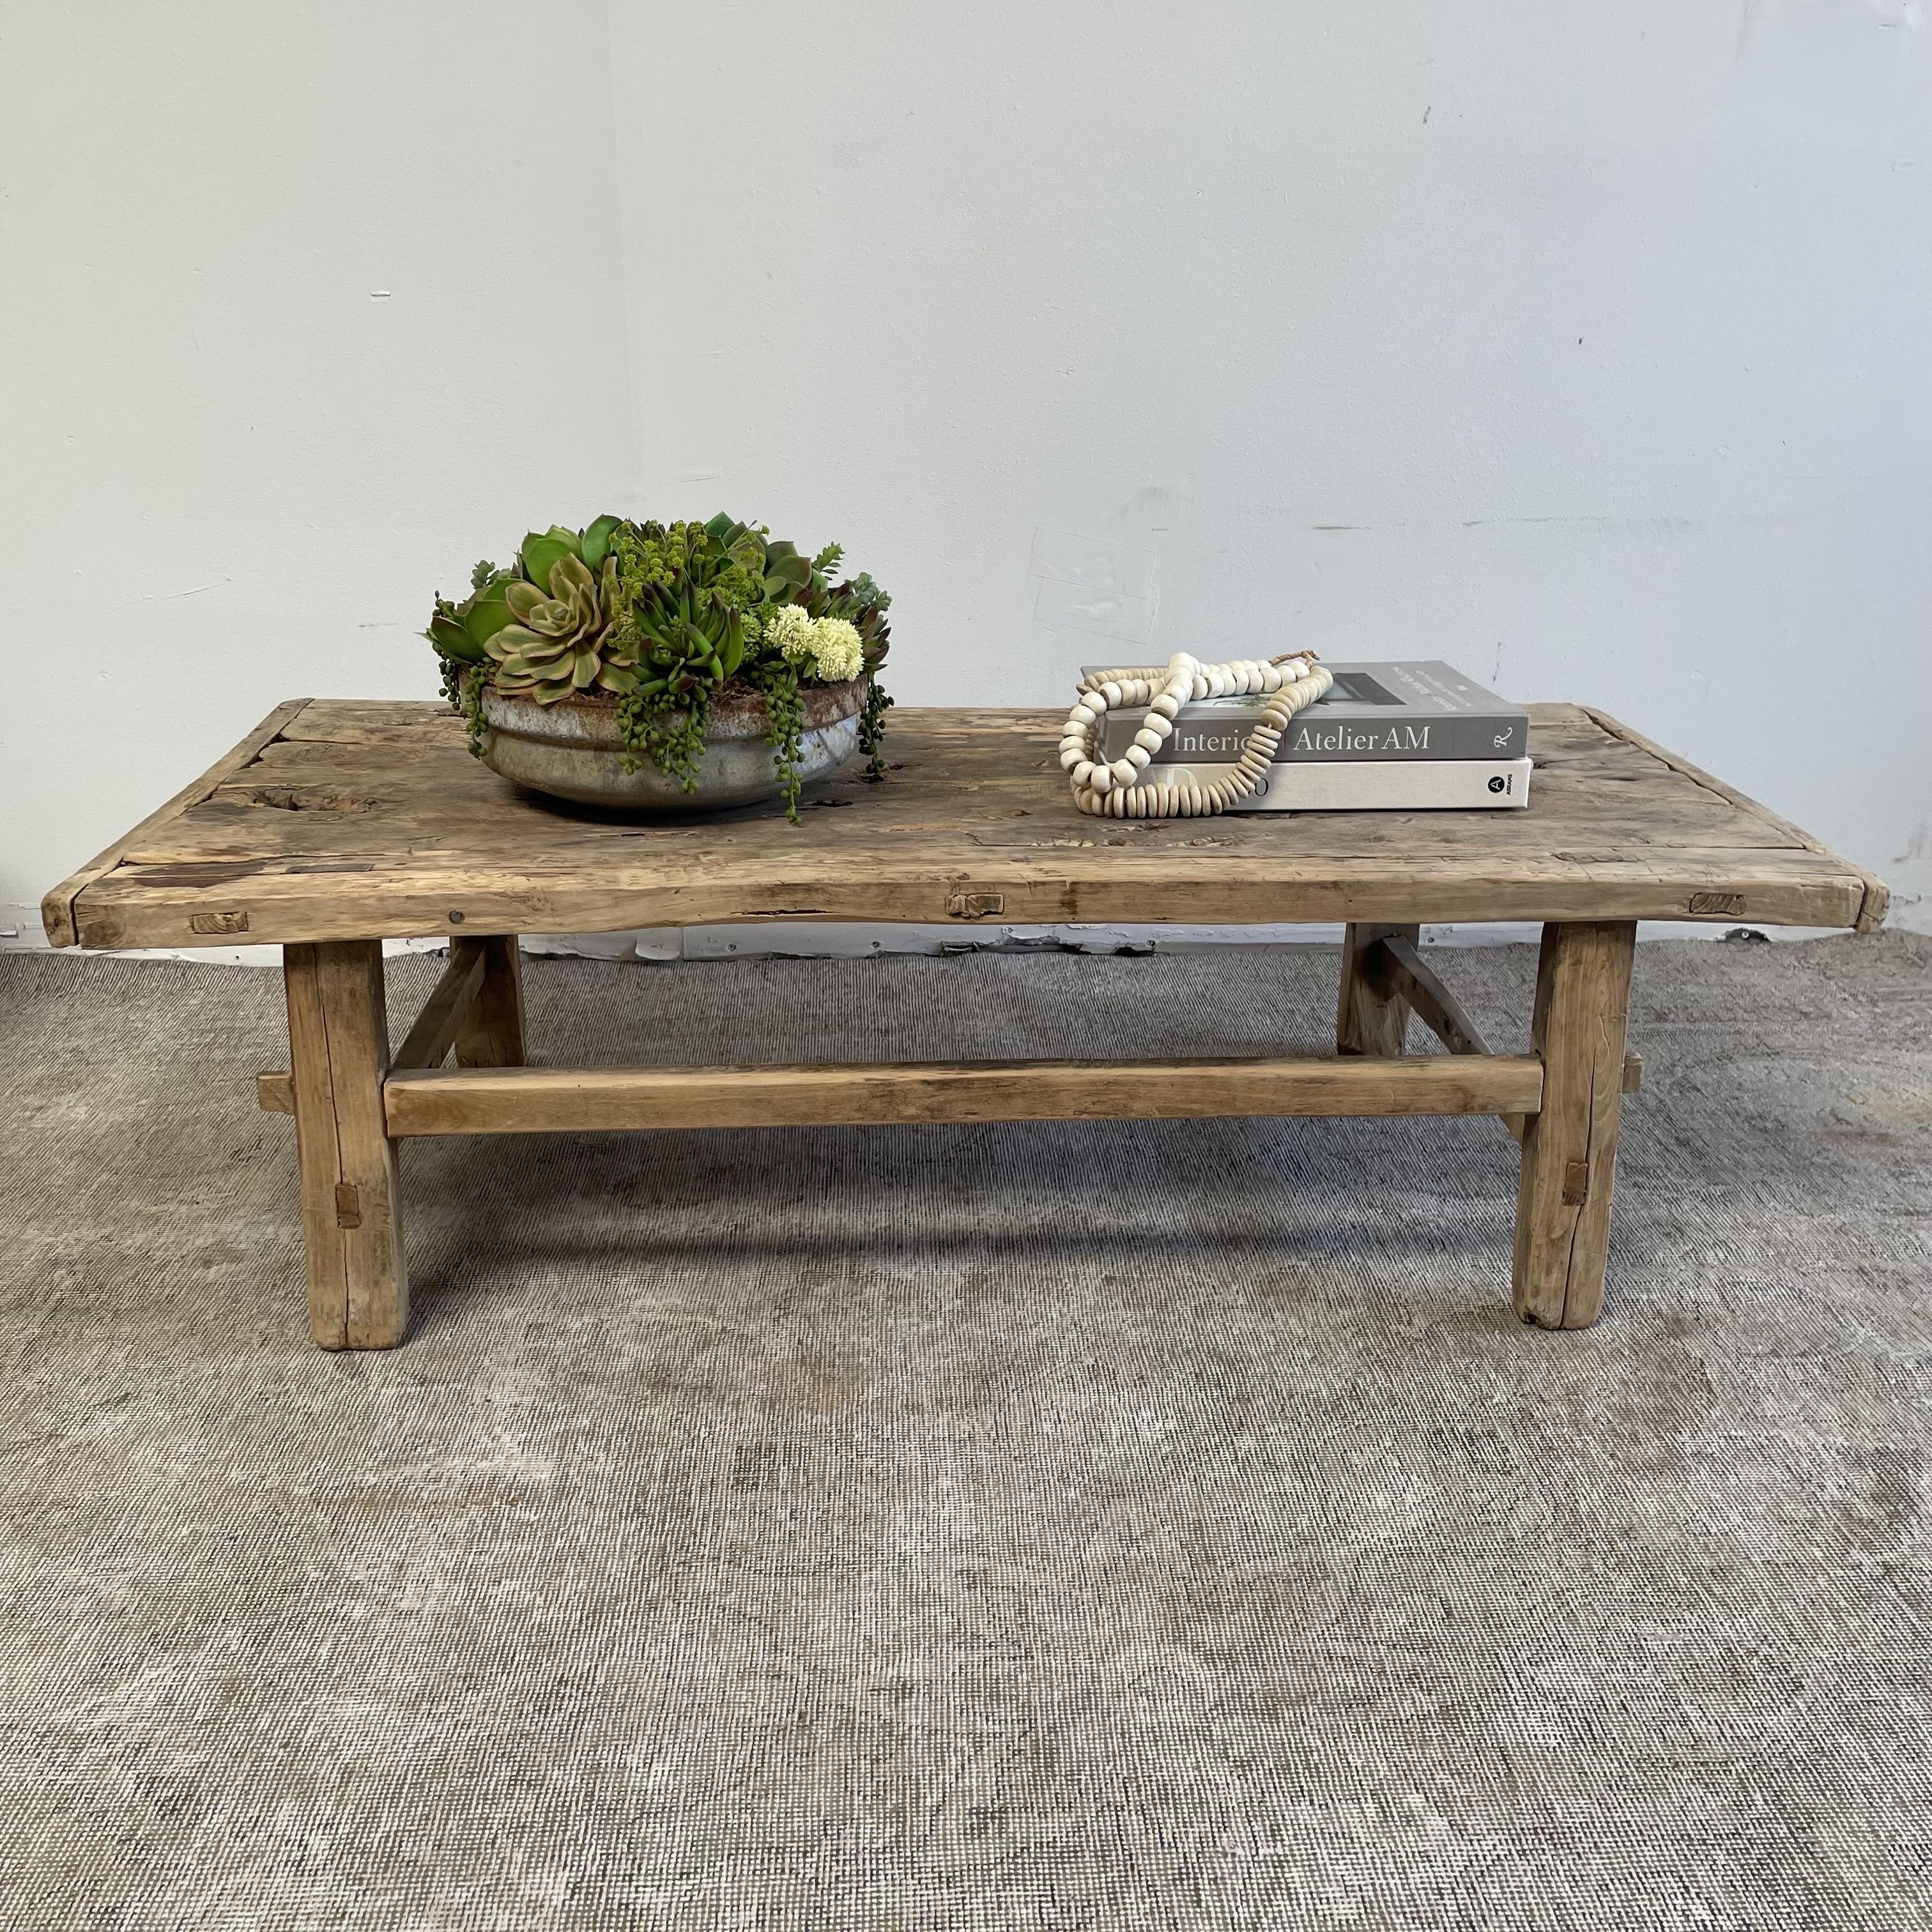 Vintage antique Elm wood coffee table with beautiful antique weathered patina top
These are the real vintage antique elm wood coffee table! Beautiful antique patina, with weathering and age, these are solid and sturdy ready for daily use, use as a